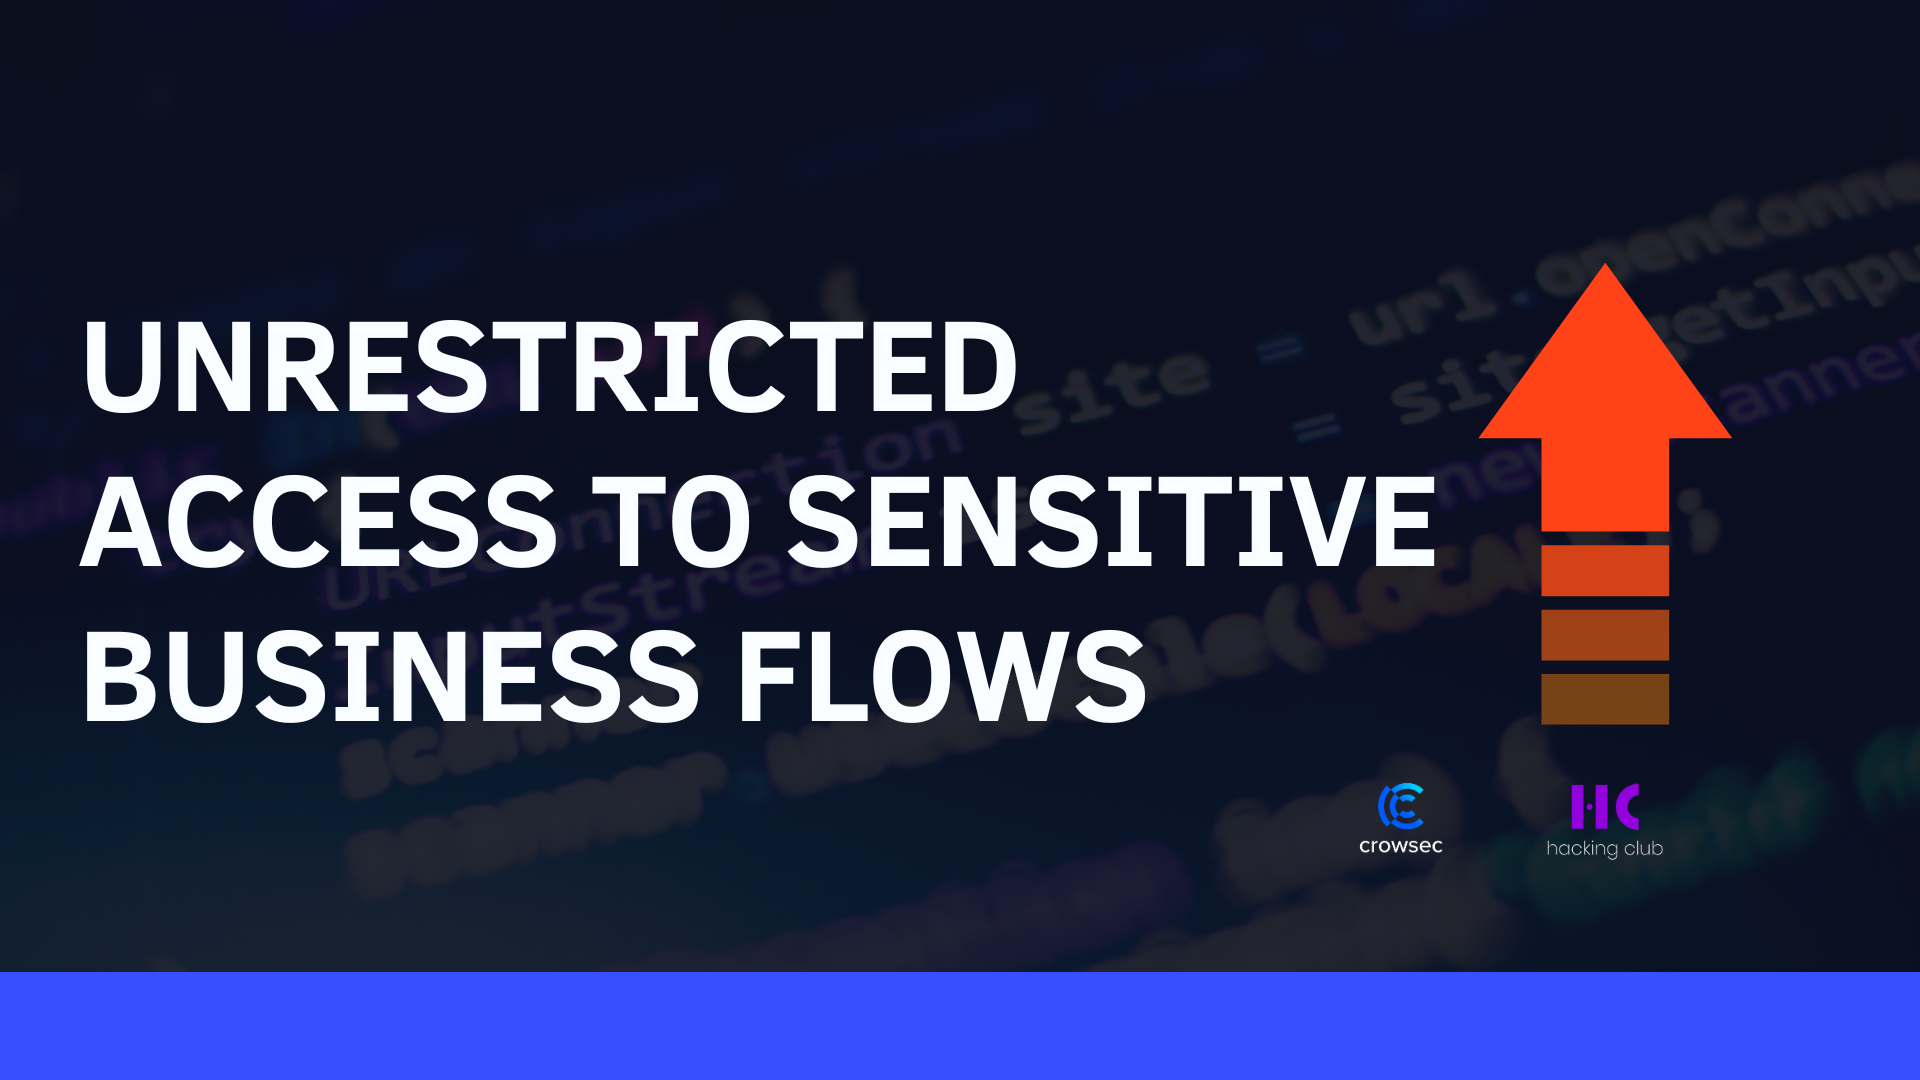 OWASP TOP 10 API - Unrestricted Access to Sensitive Business Flows